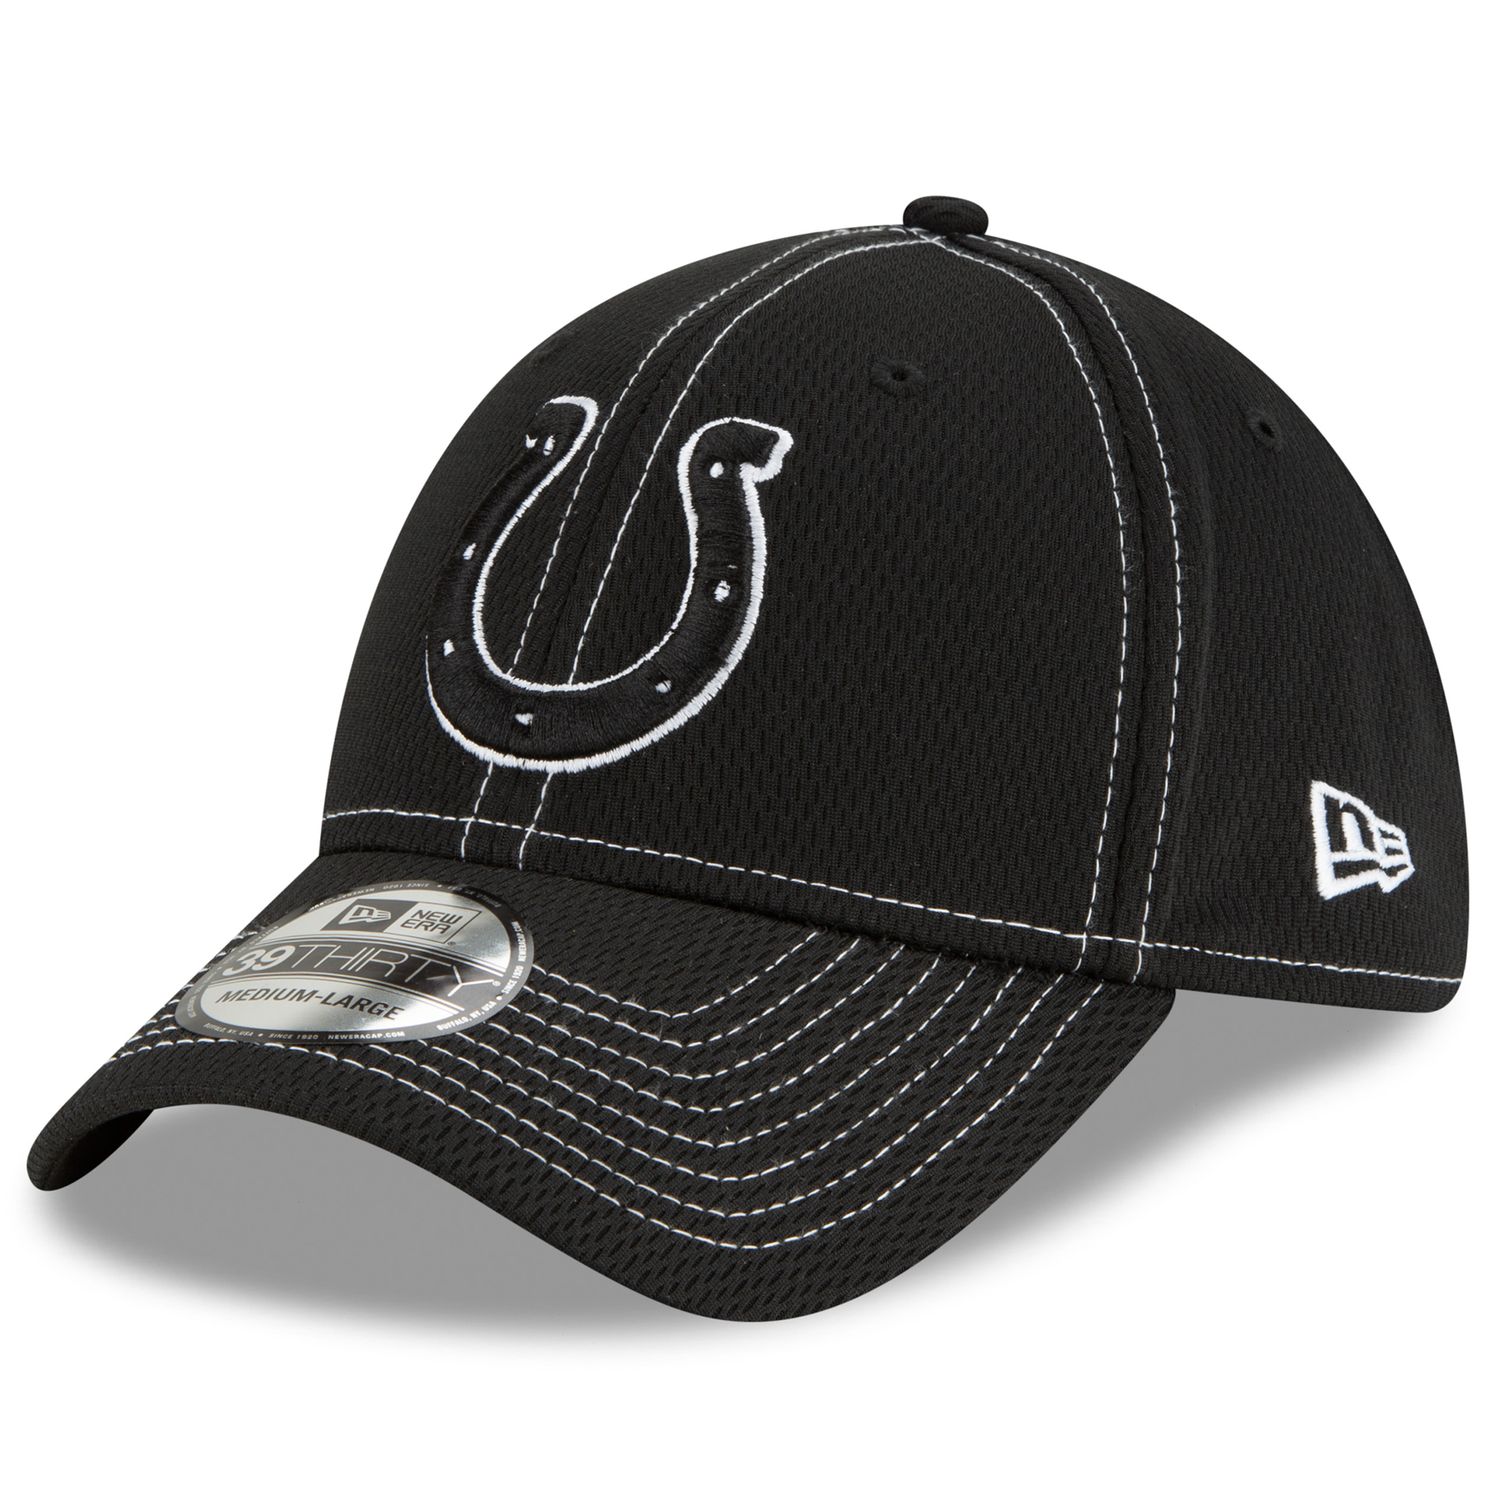 colts on field hat